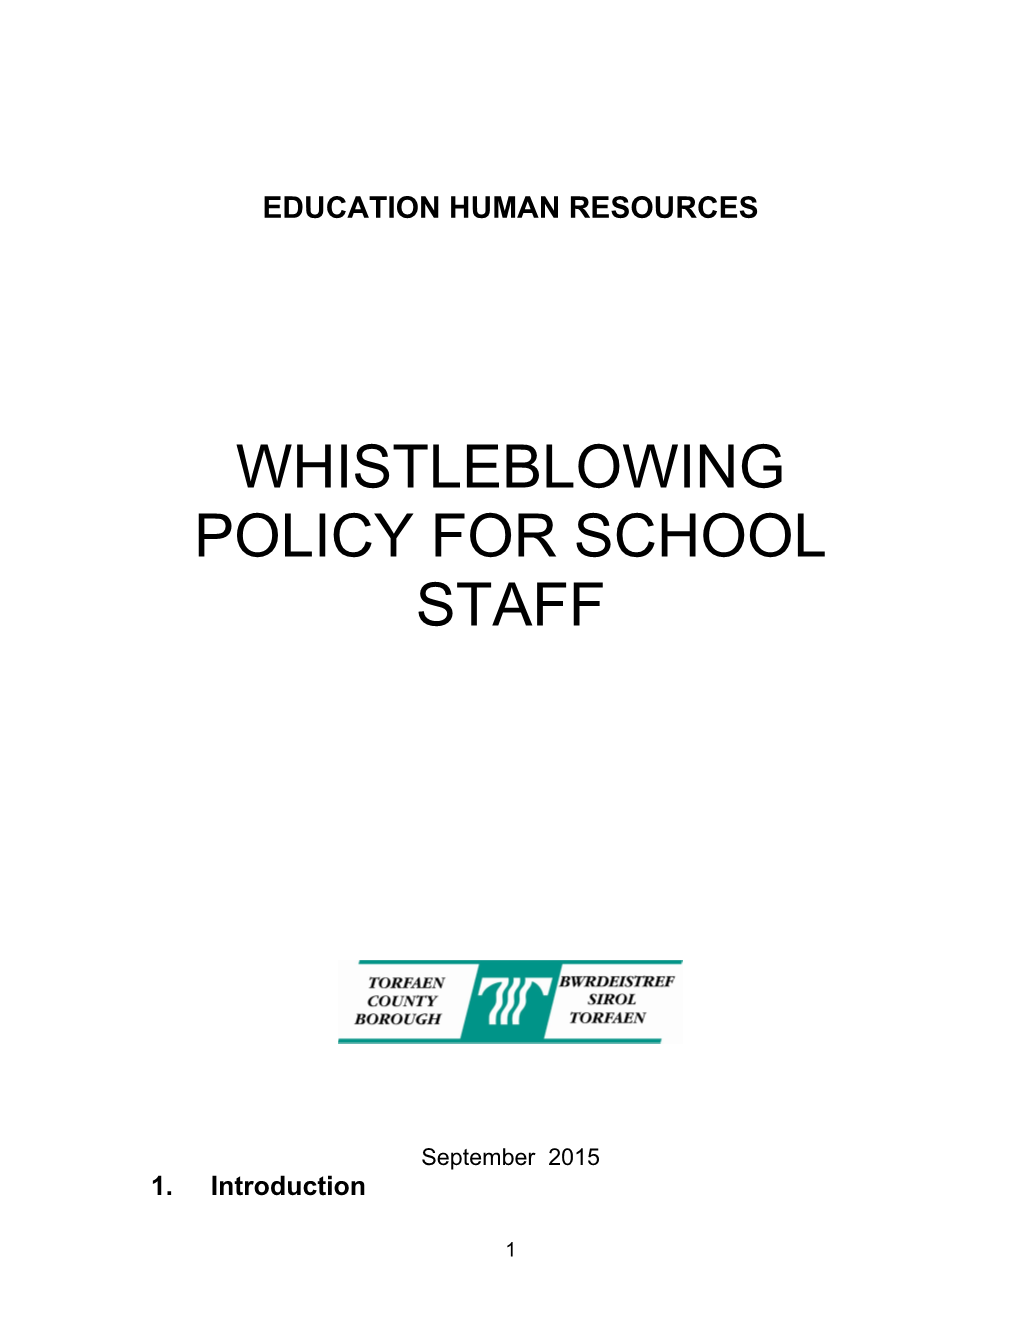 Model Whistleblowing Policy For School Staff